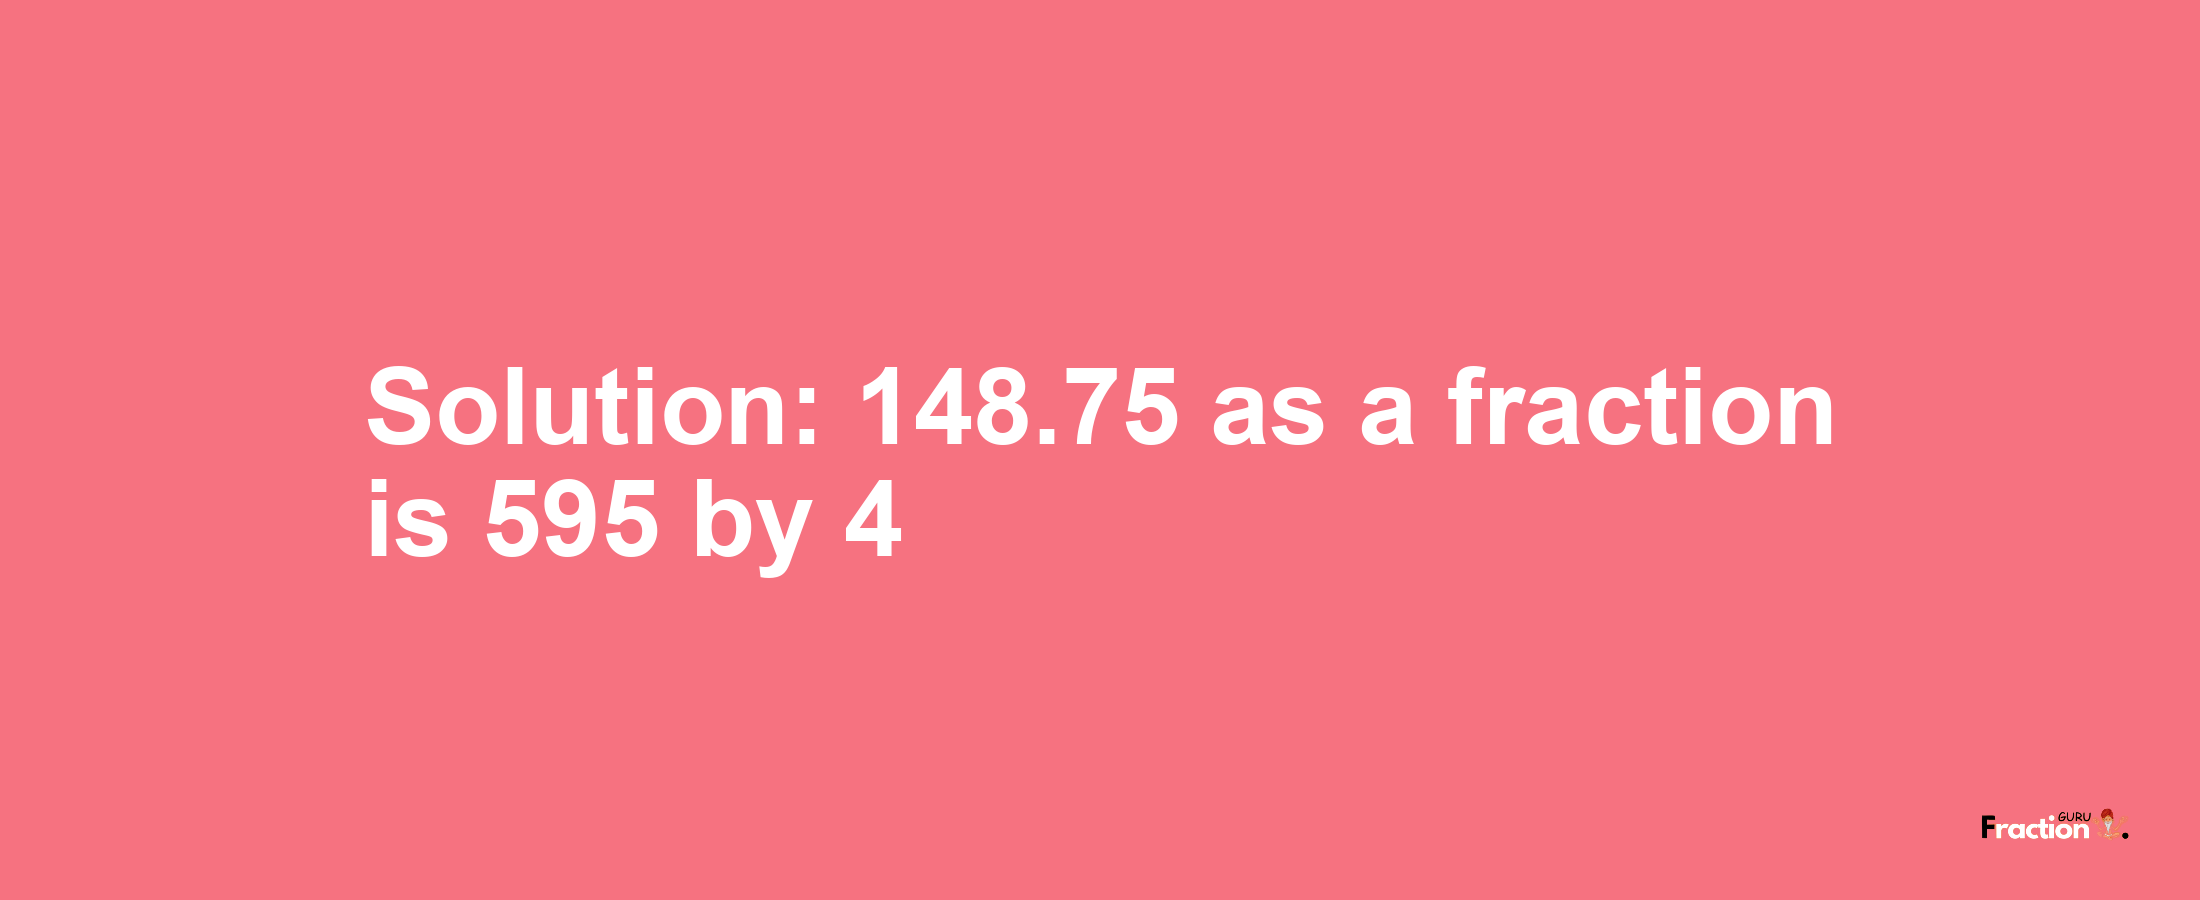 Solution:148.75 as a fraction is 595/4